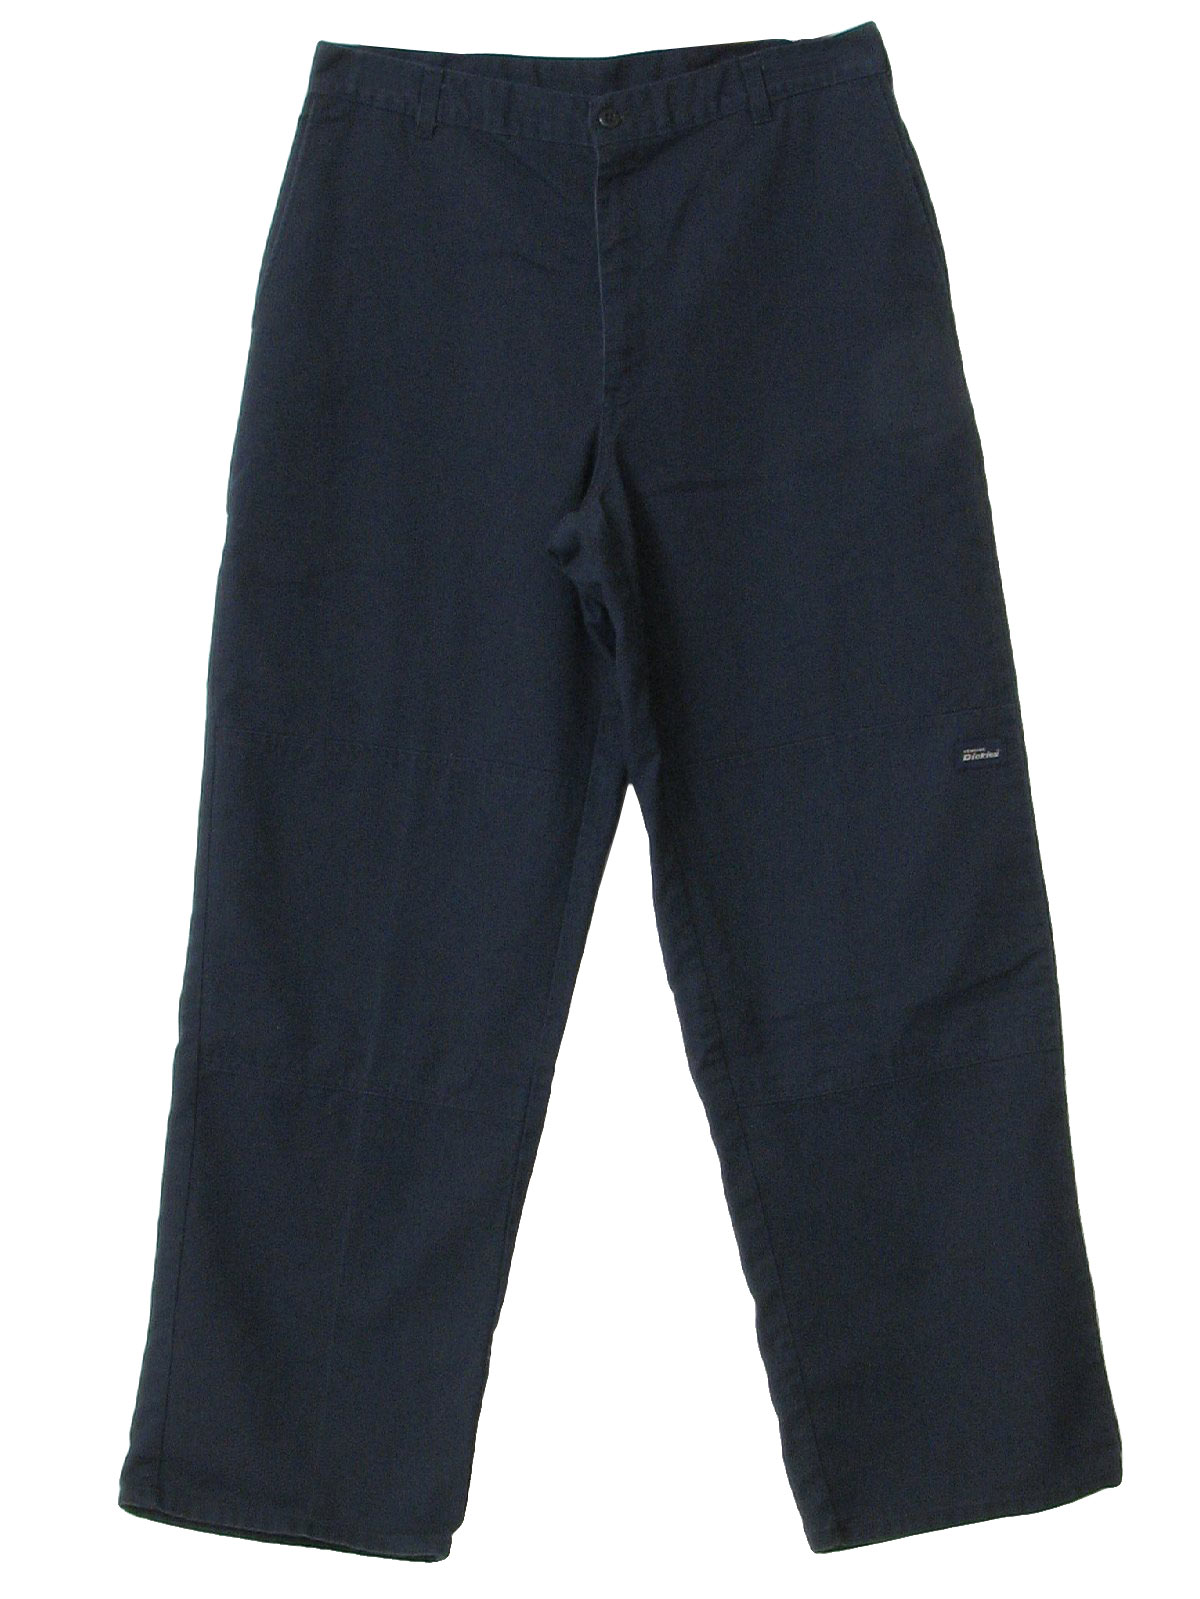 1980s Vintage Pants: 80s -Dickies- Mens cotton polyester blend straight ...